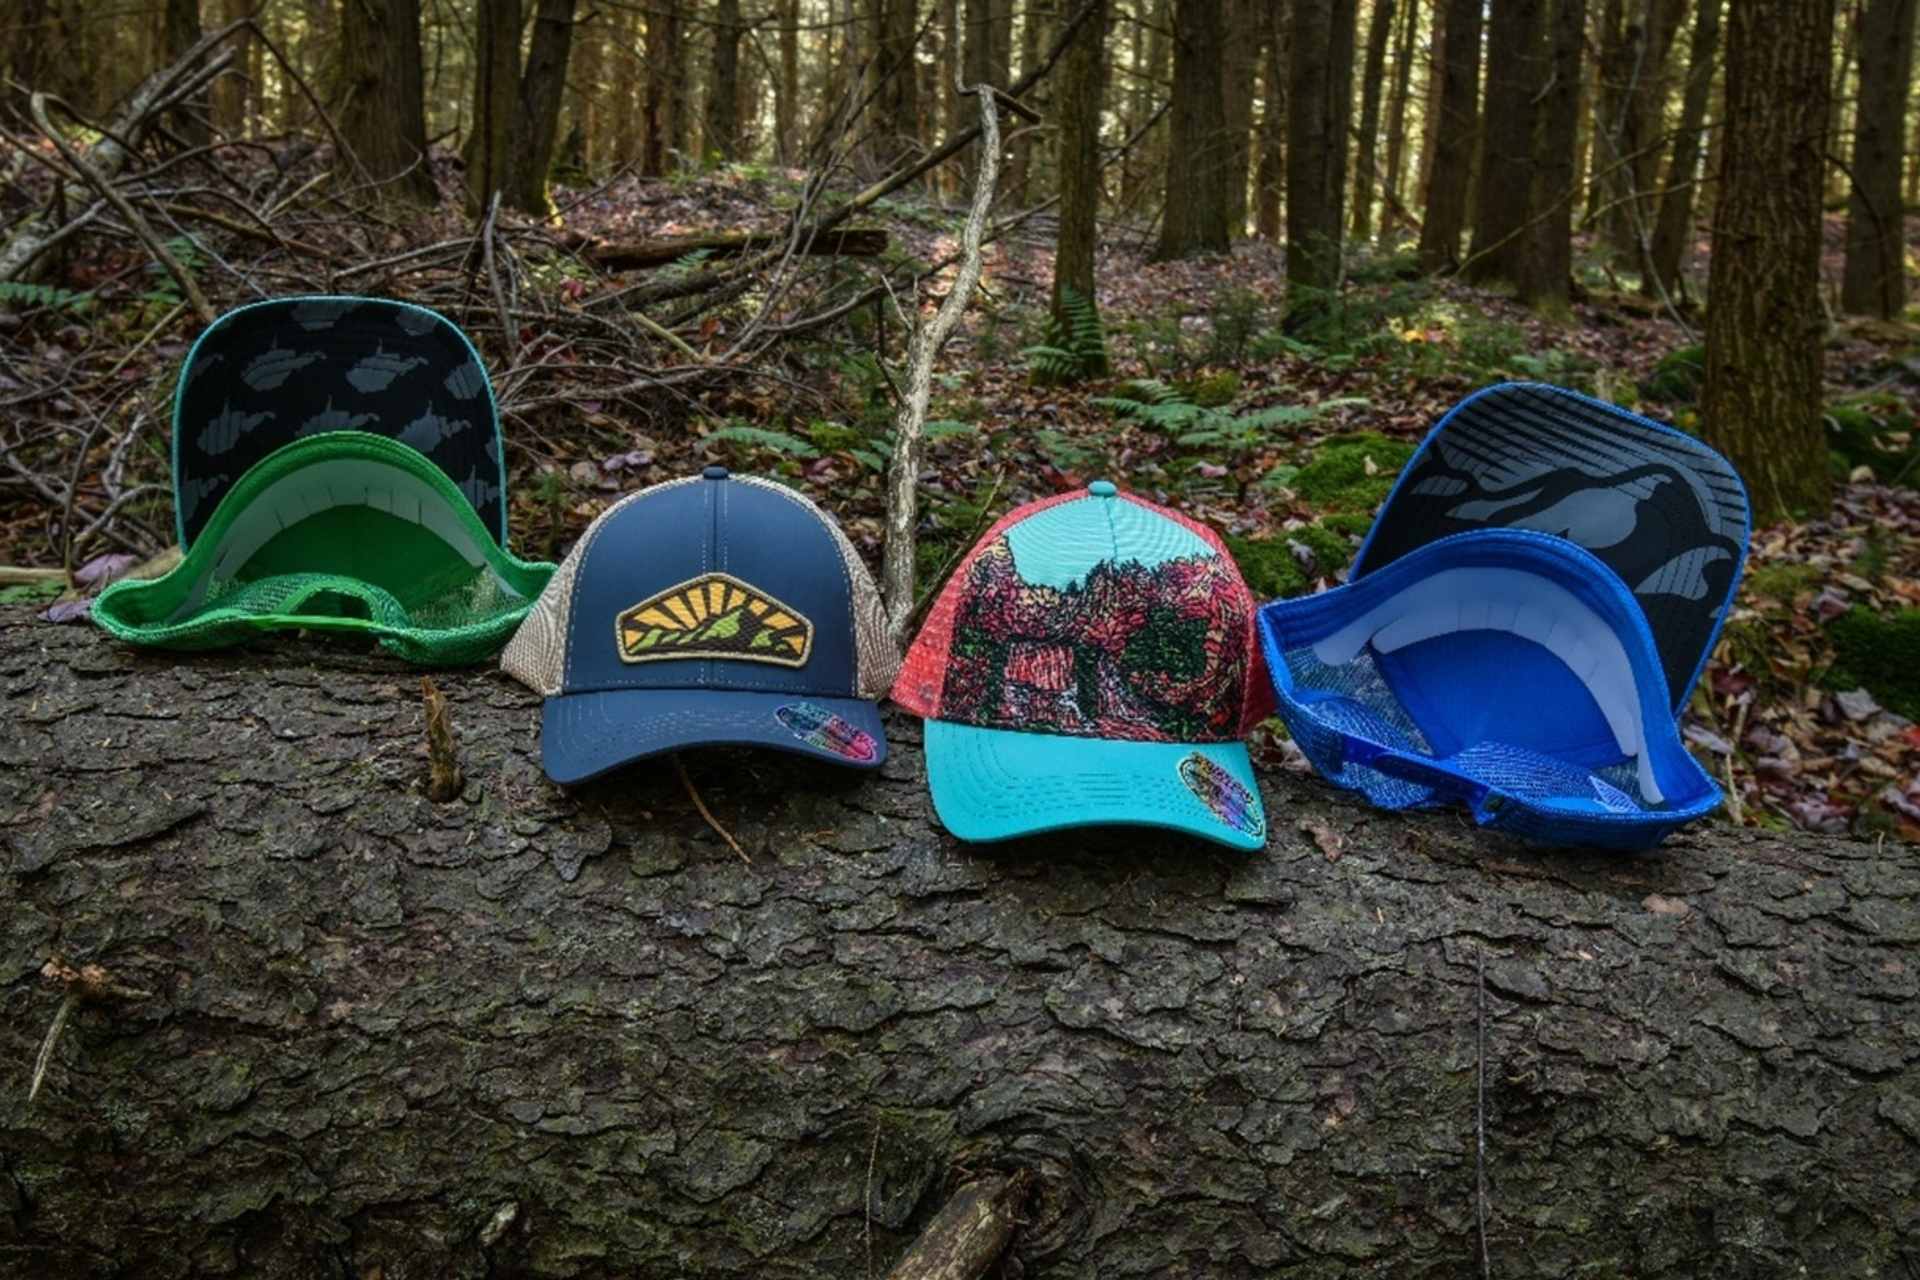 The Canaan Valley Running Company’s hats are quality made and can be fashionably worn in an athletic or casual setting.